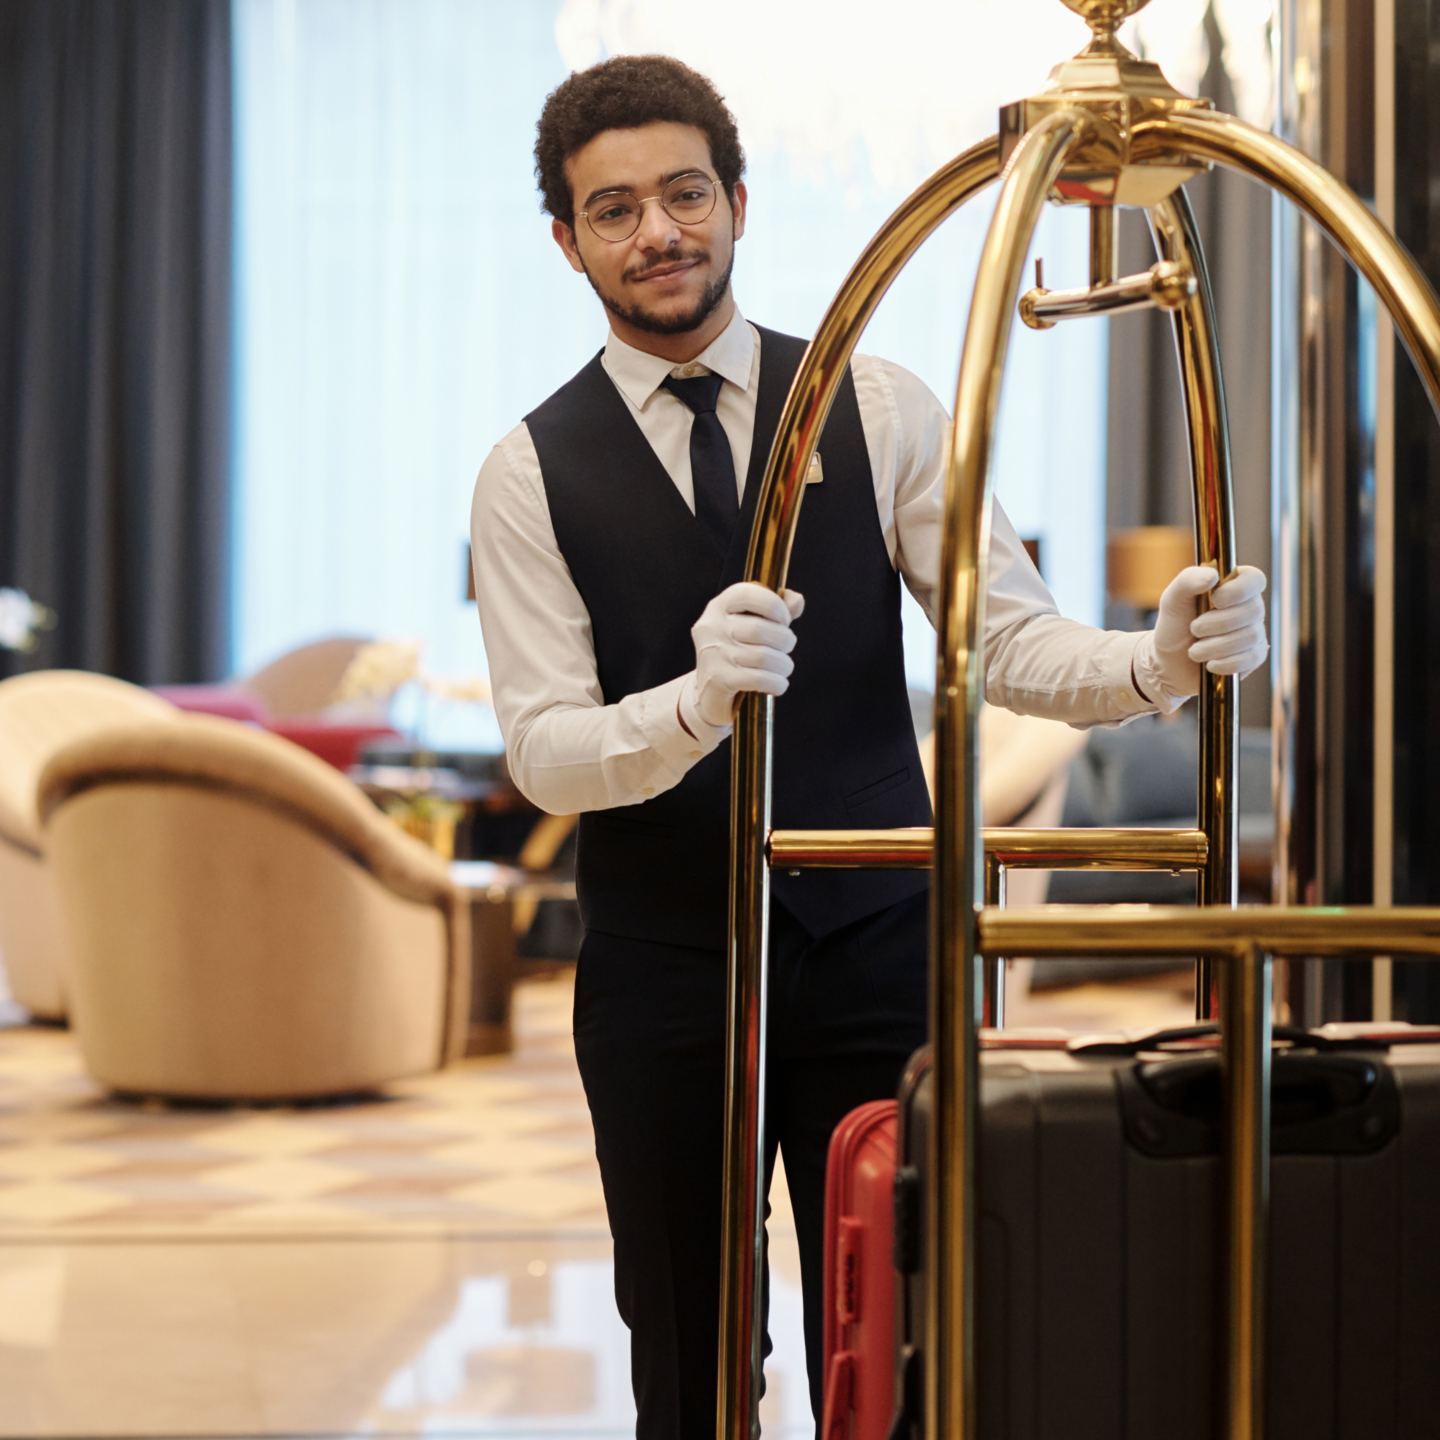 bellboy carrying luggage for hotel guests